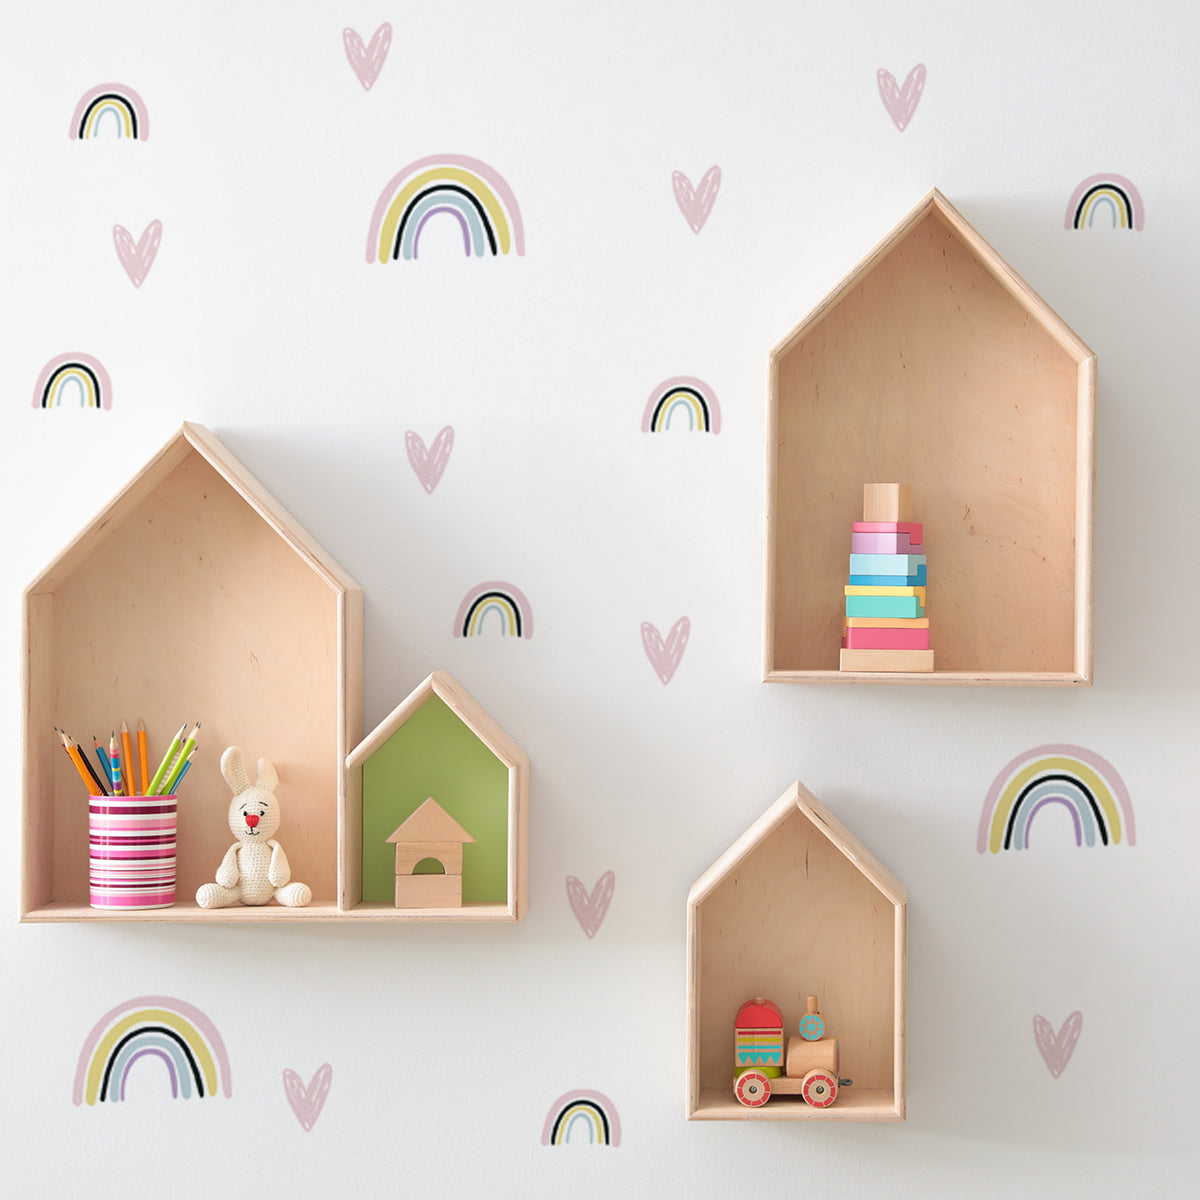 rainbow wall stickers with hearts, hearts and rainbows wall decals, pattern wall sticker with rainbows and hearts, rainbow nursery decoration